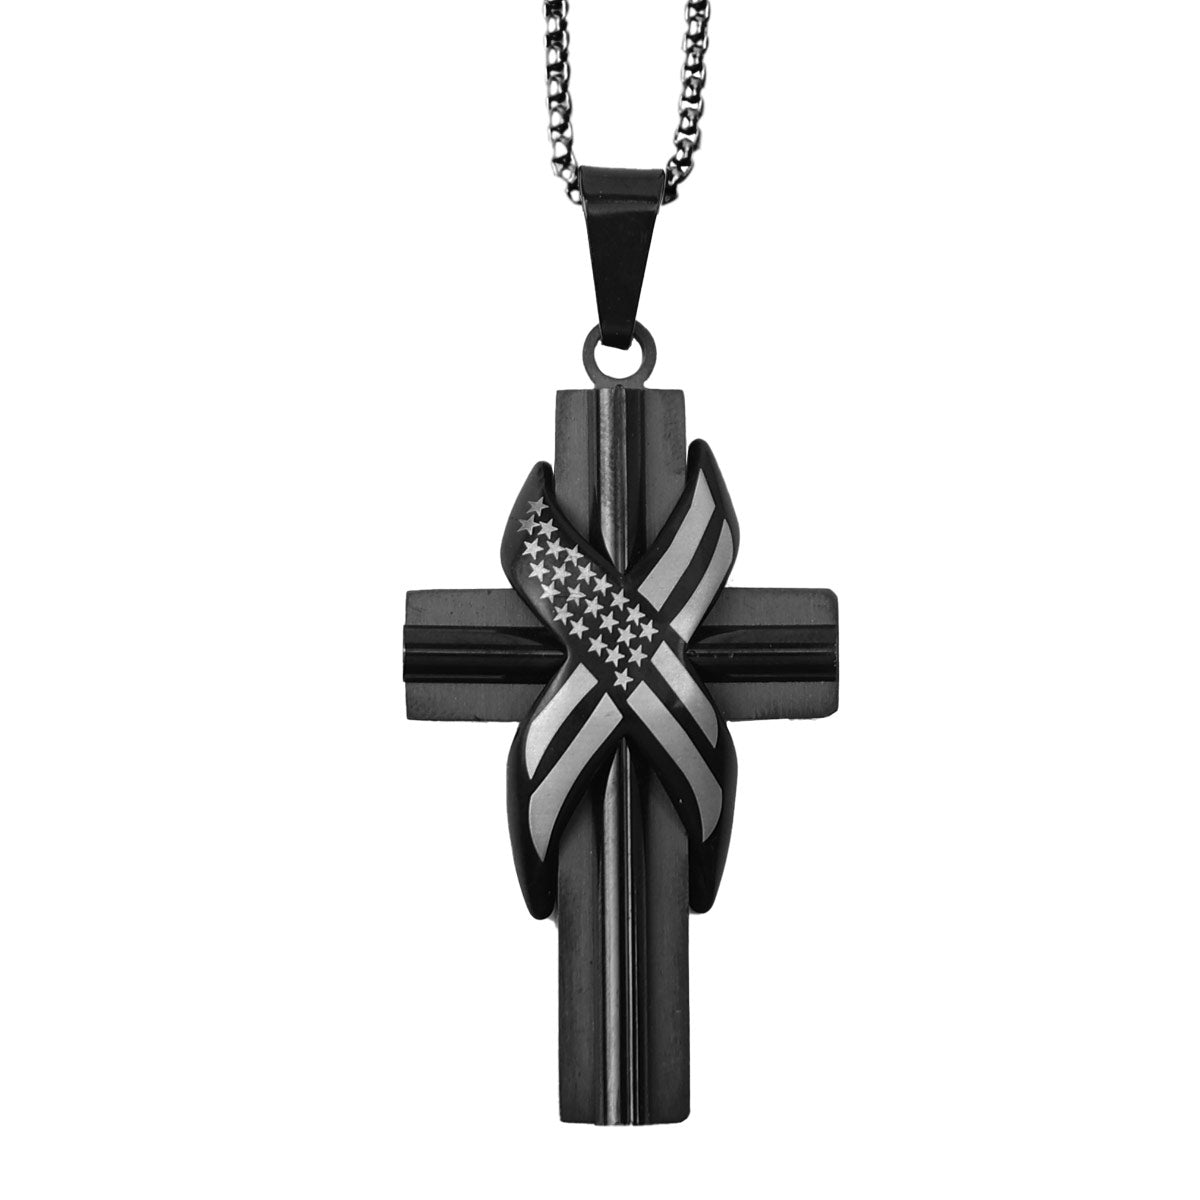 HOLD FAST Mens Necklace Wrapped Flag Cross